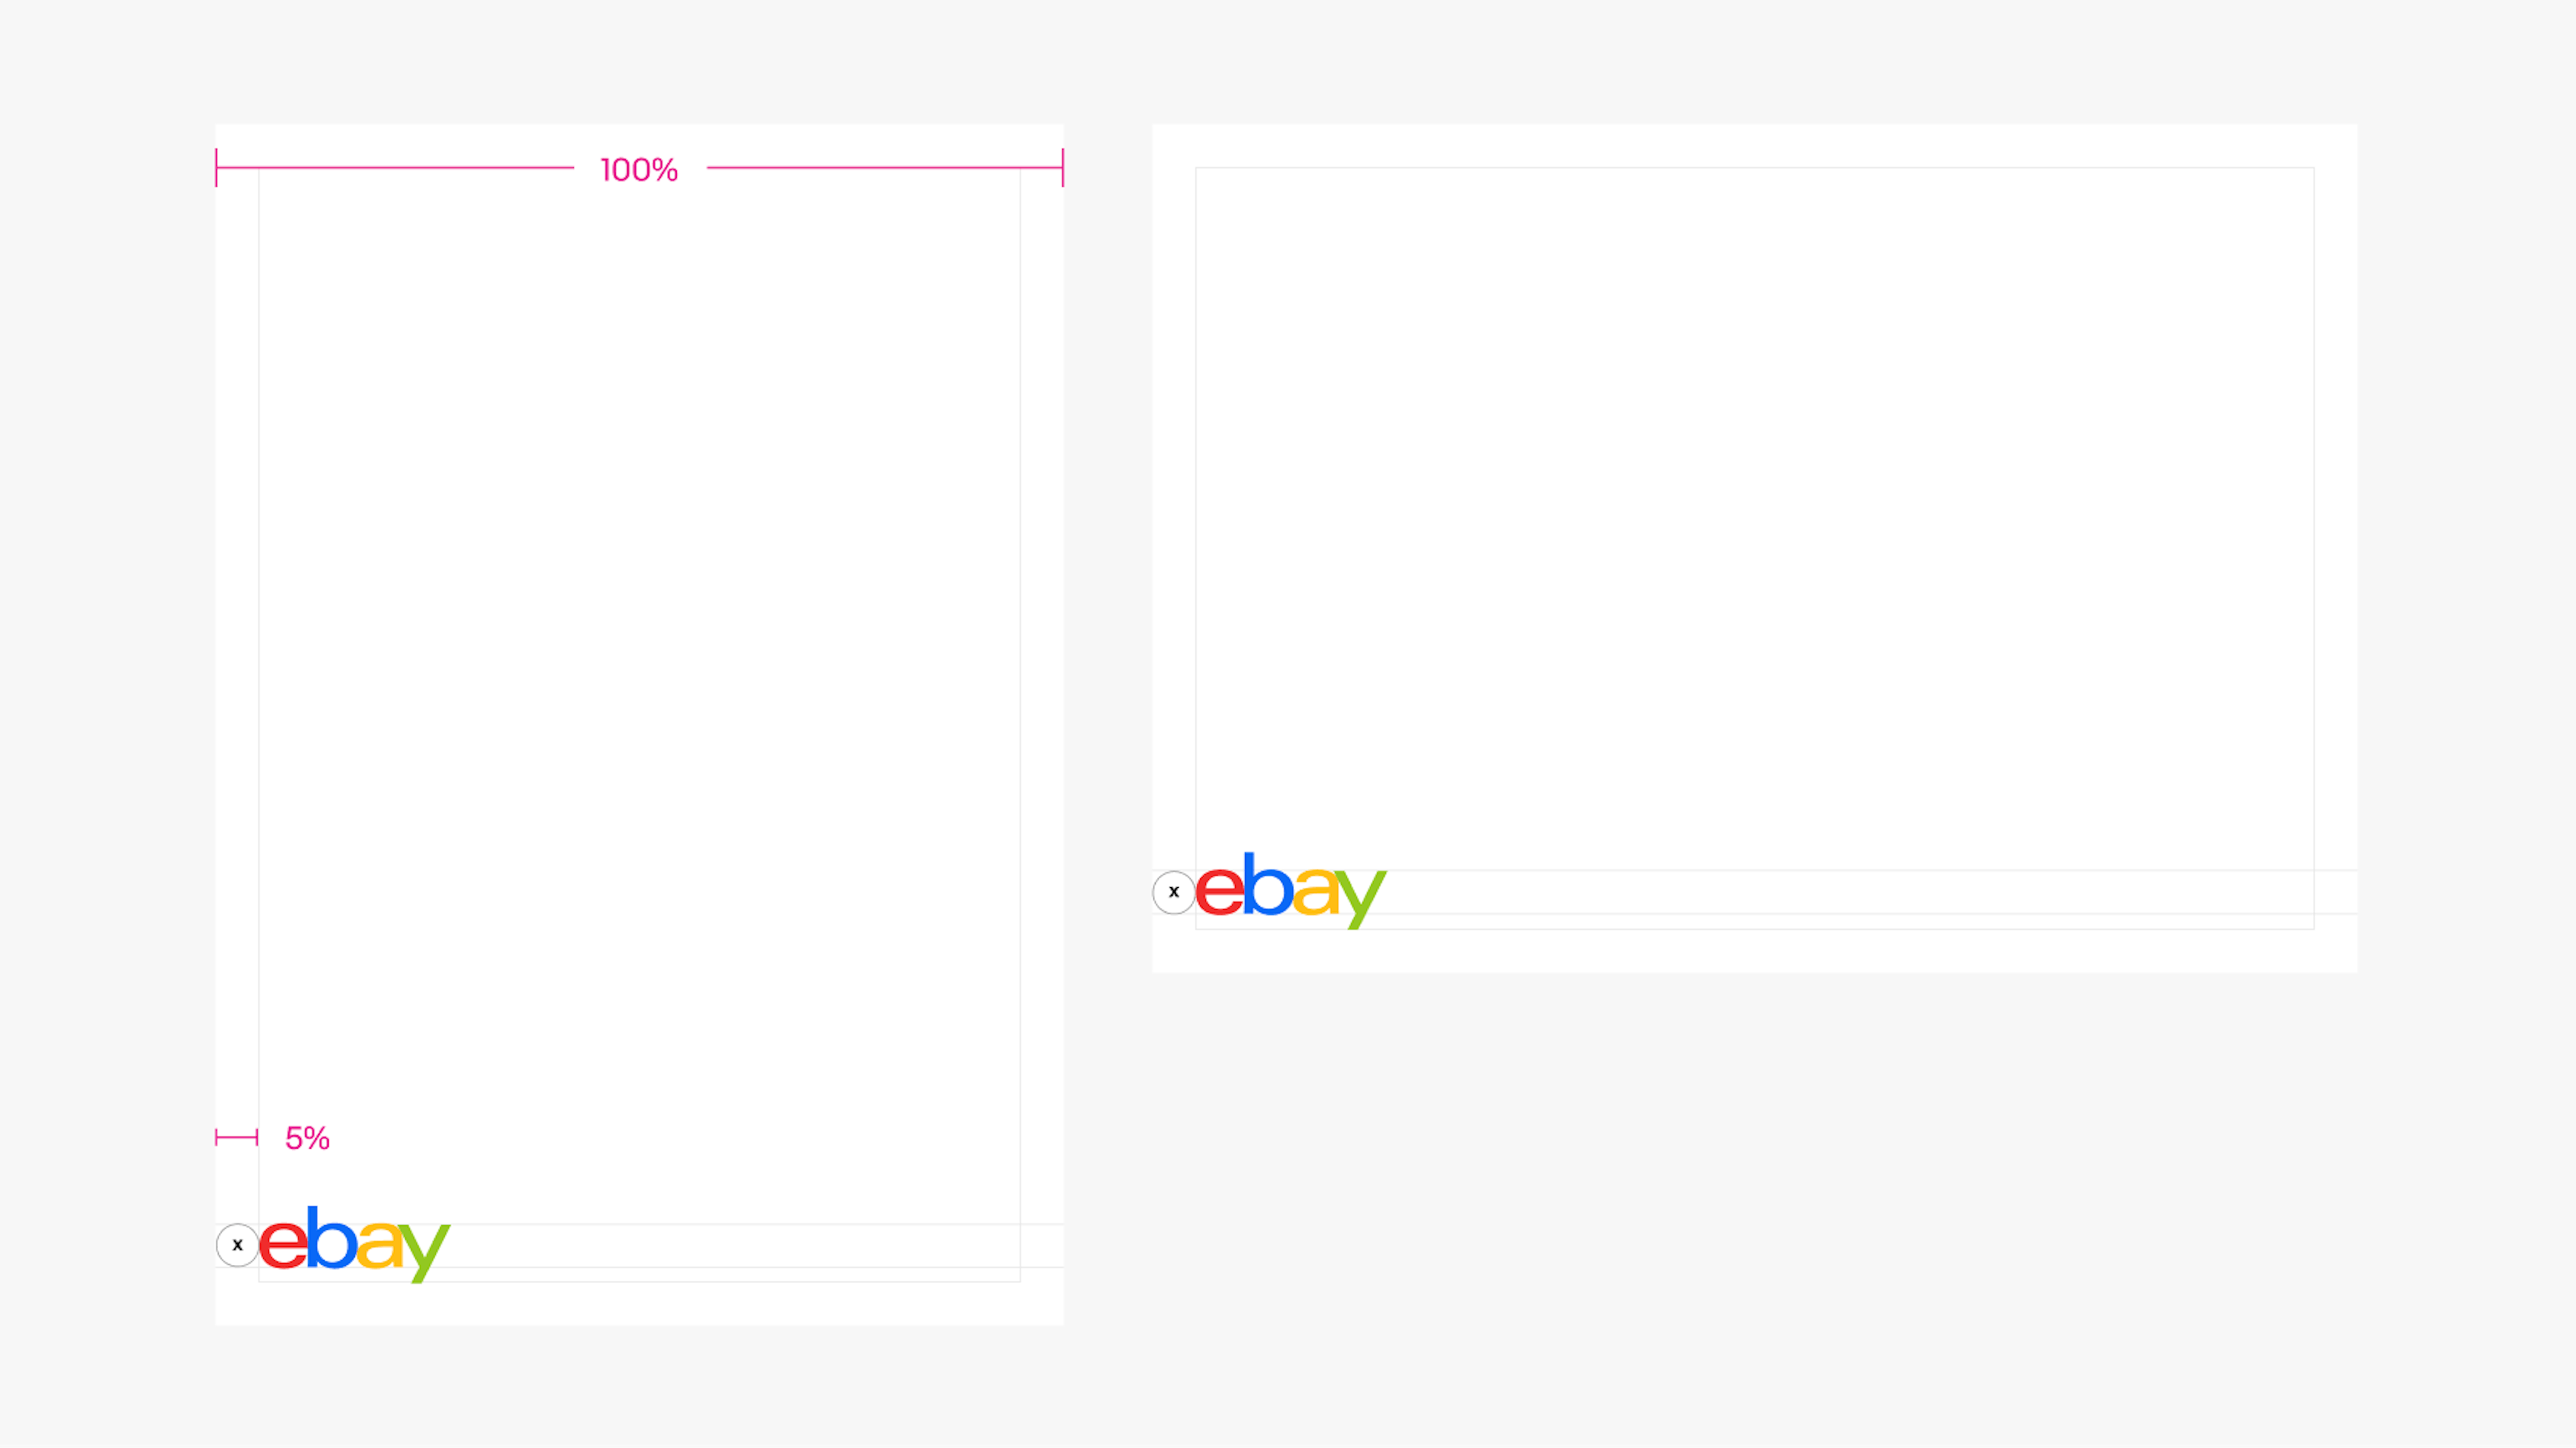 A portrait and landscape design layout detailing the margin around the eBay logo in the lower left corners.